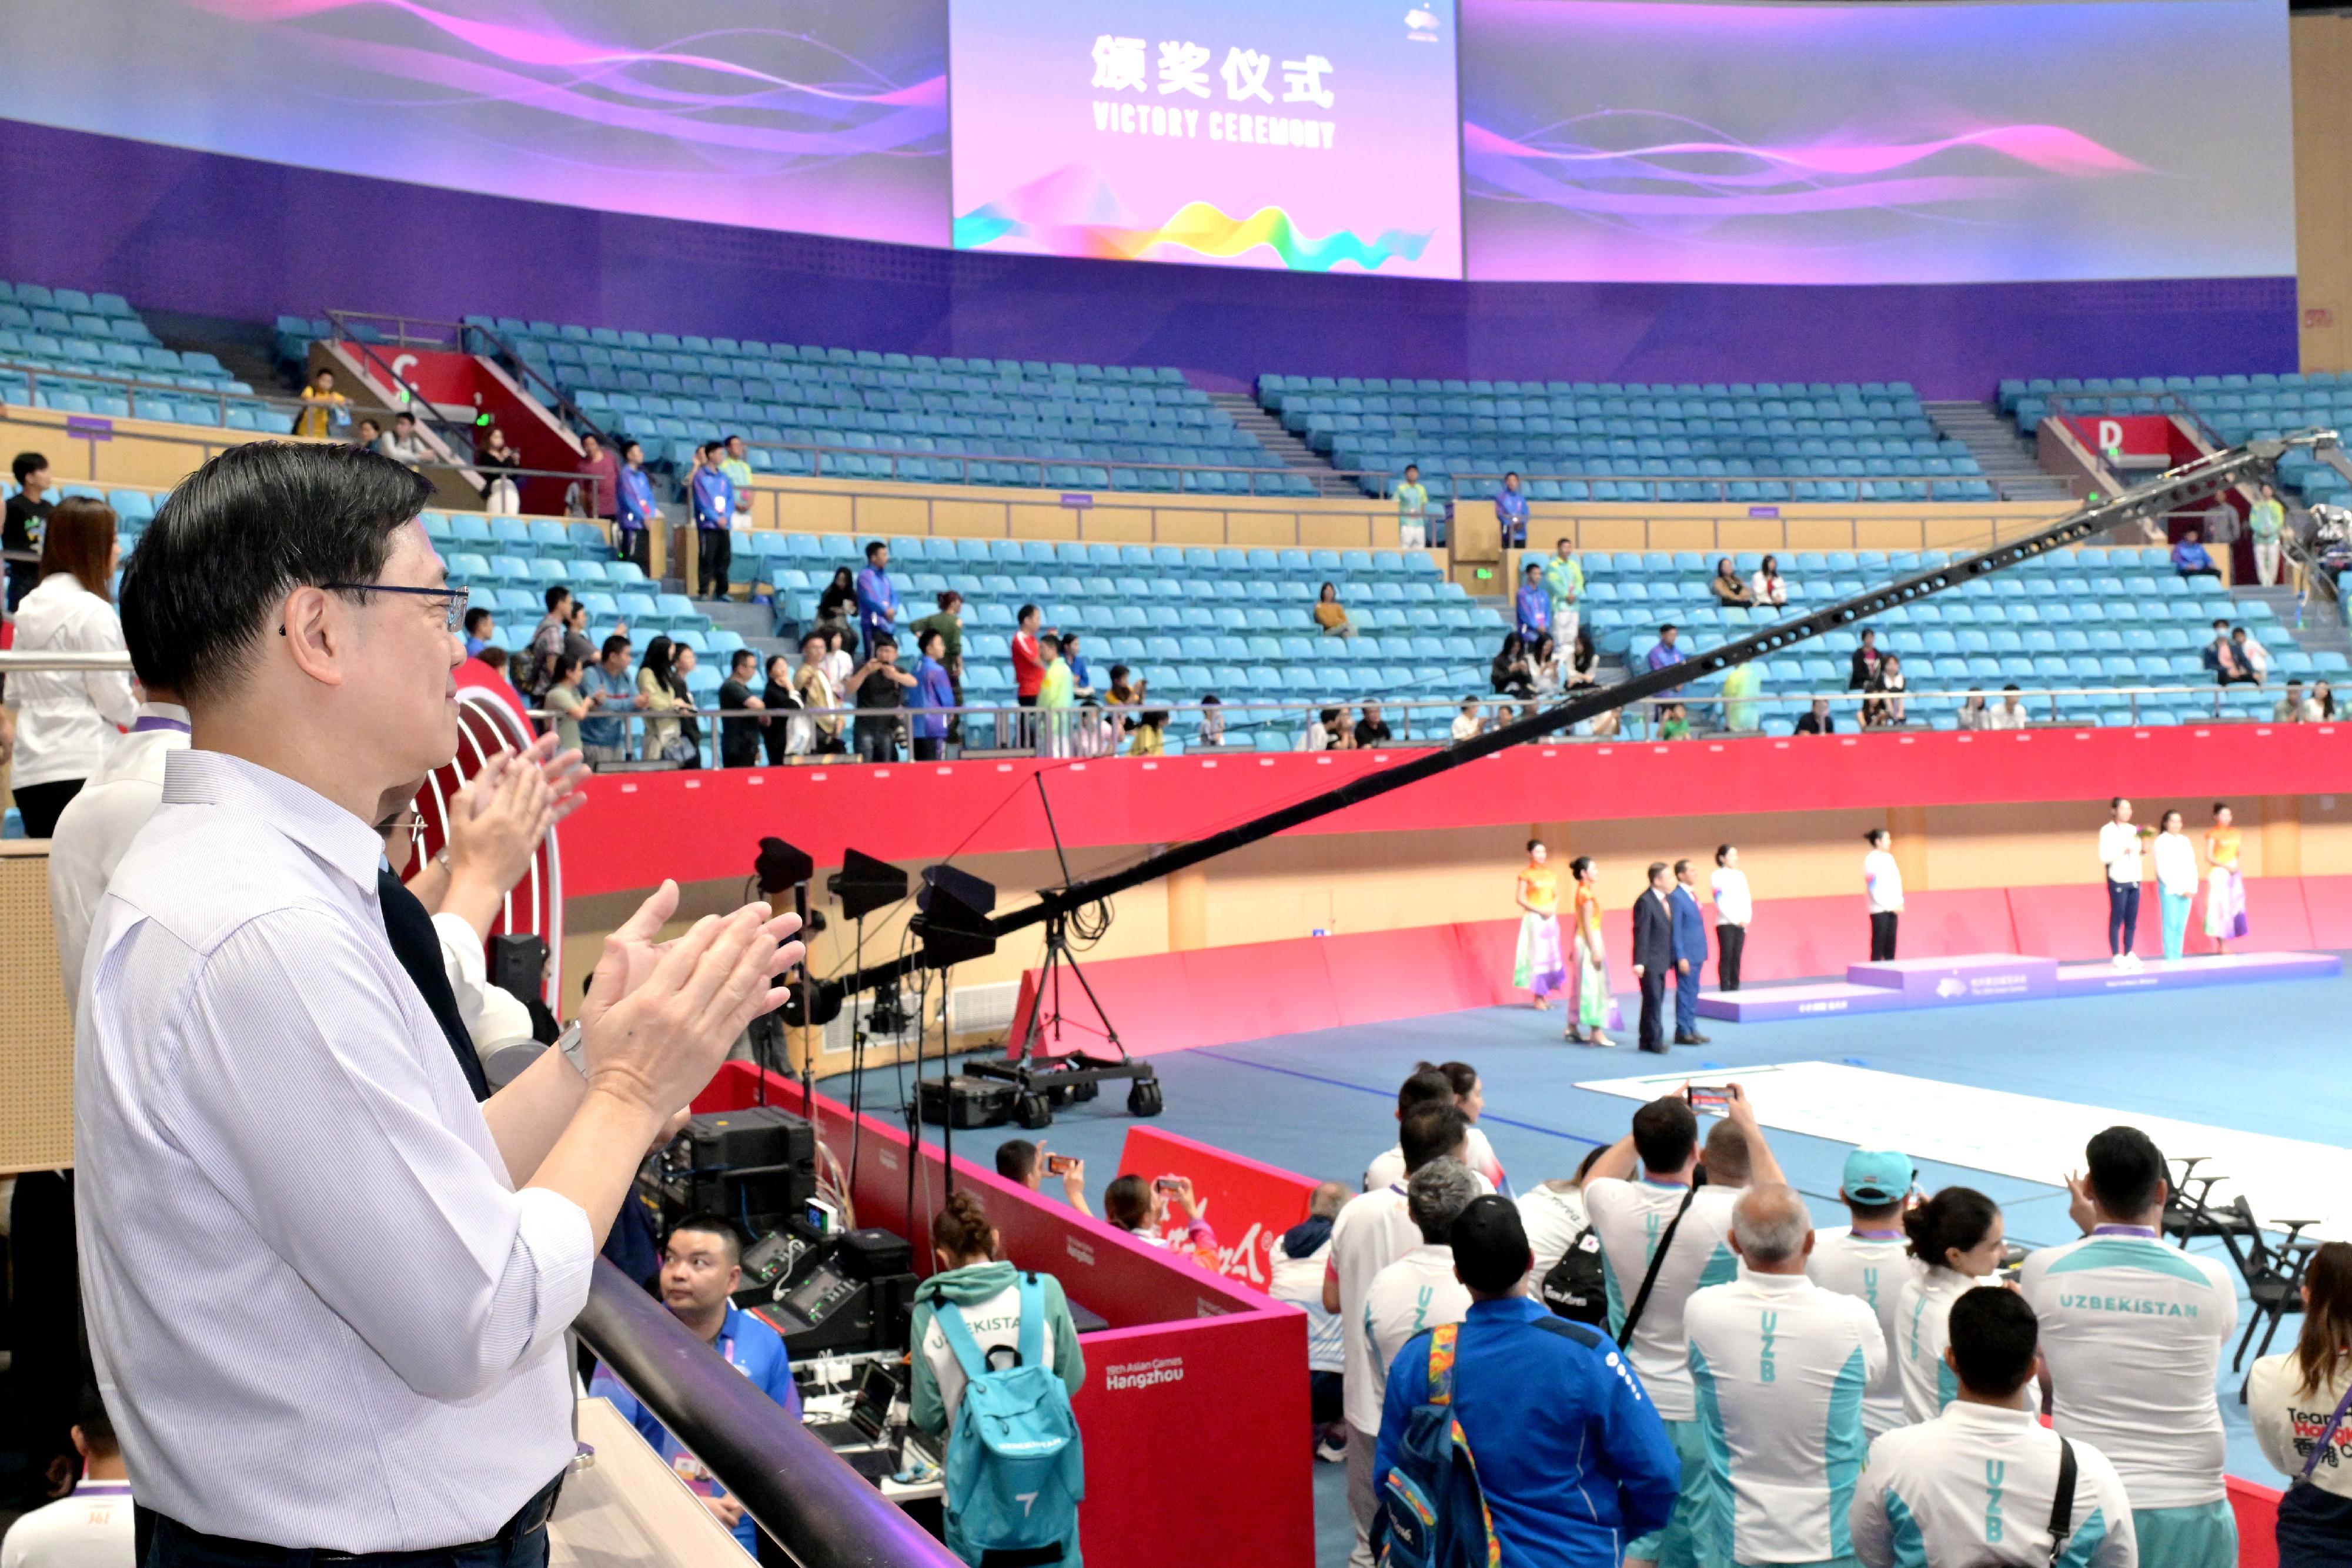 The Chief Executive, Mr John Lee, led a Hong Kong Special Administrative Region Government delegation to Hangzhou and continued his visit programme on September 24. Photo shows Mr Lee at the Victory Ceremony of the Women's Épée Individual at the 19th Asian Games Hangzhou.

